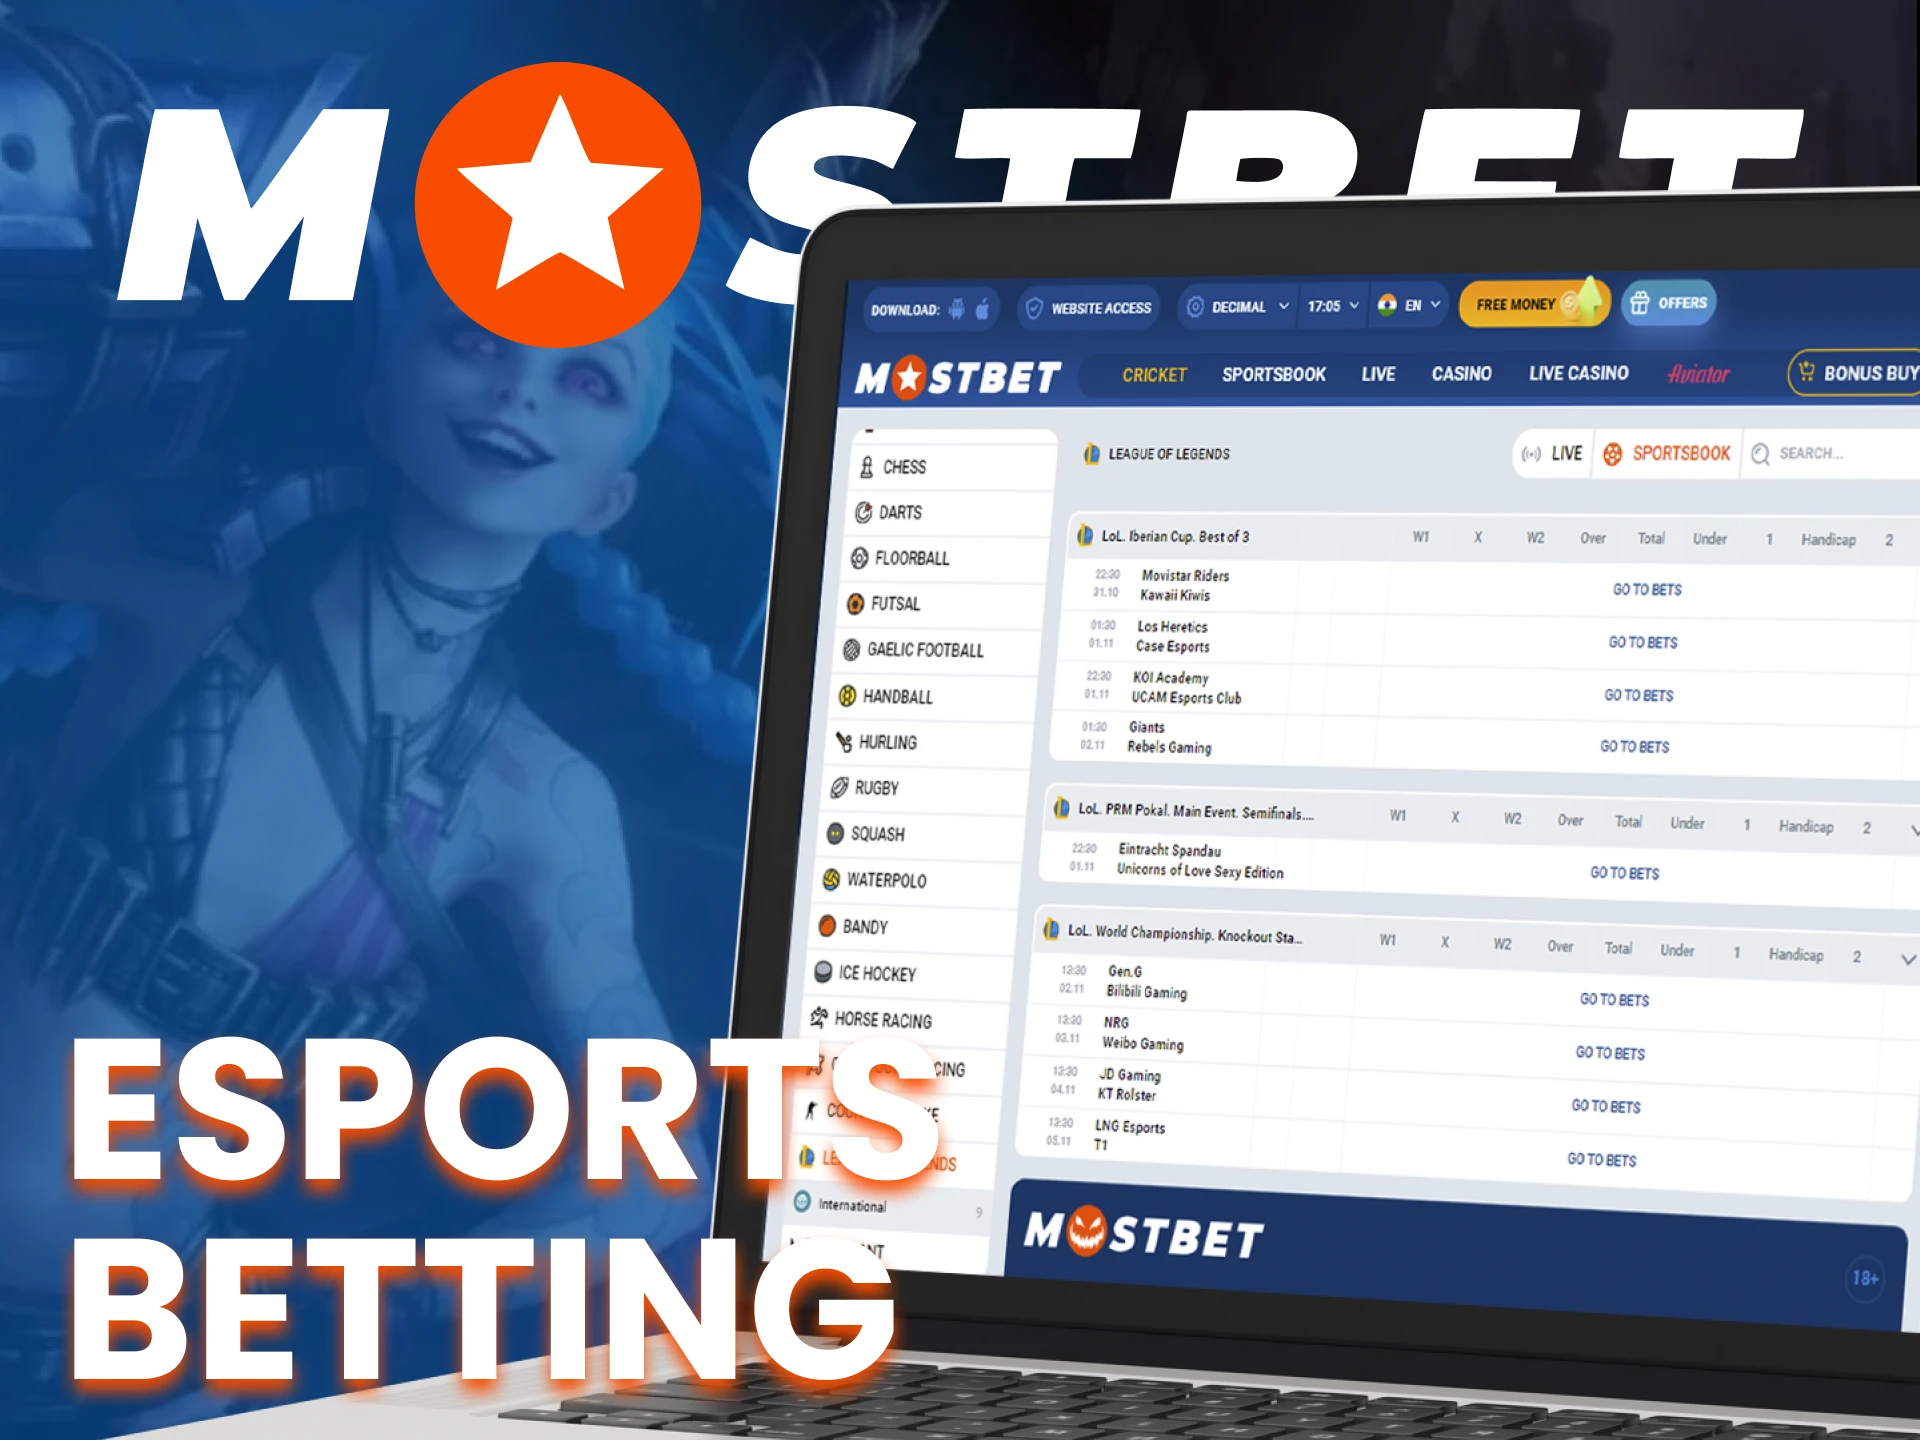 At Mostbet, place your bets on esports.